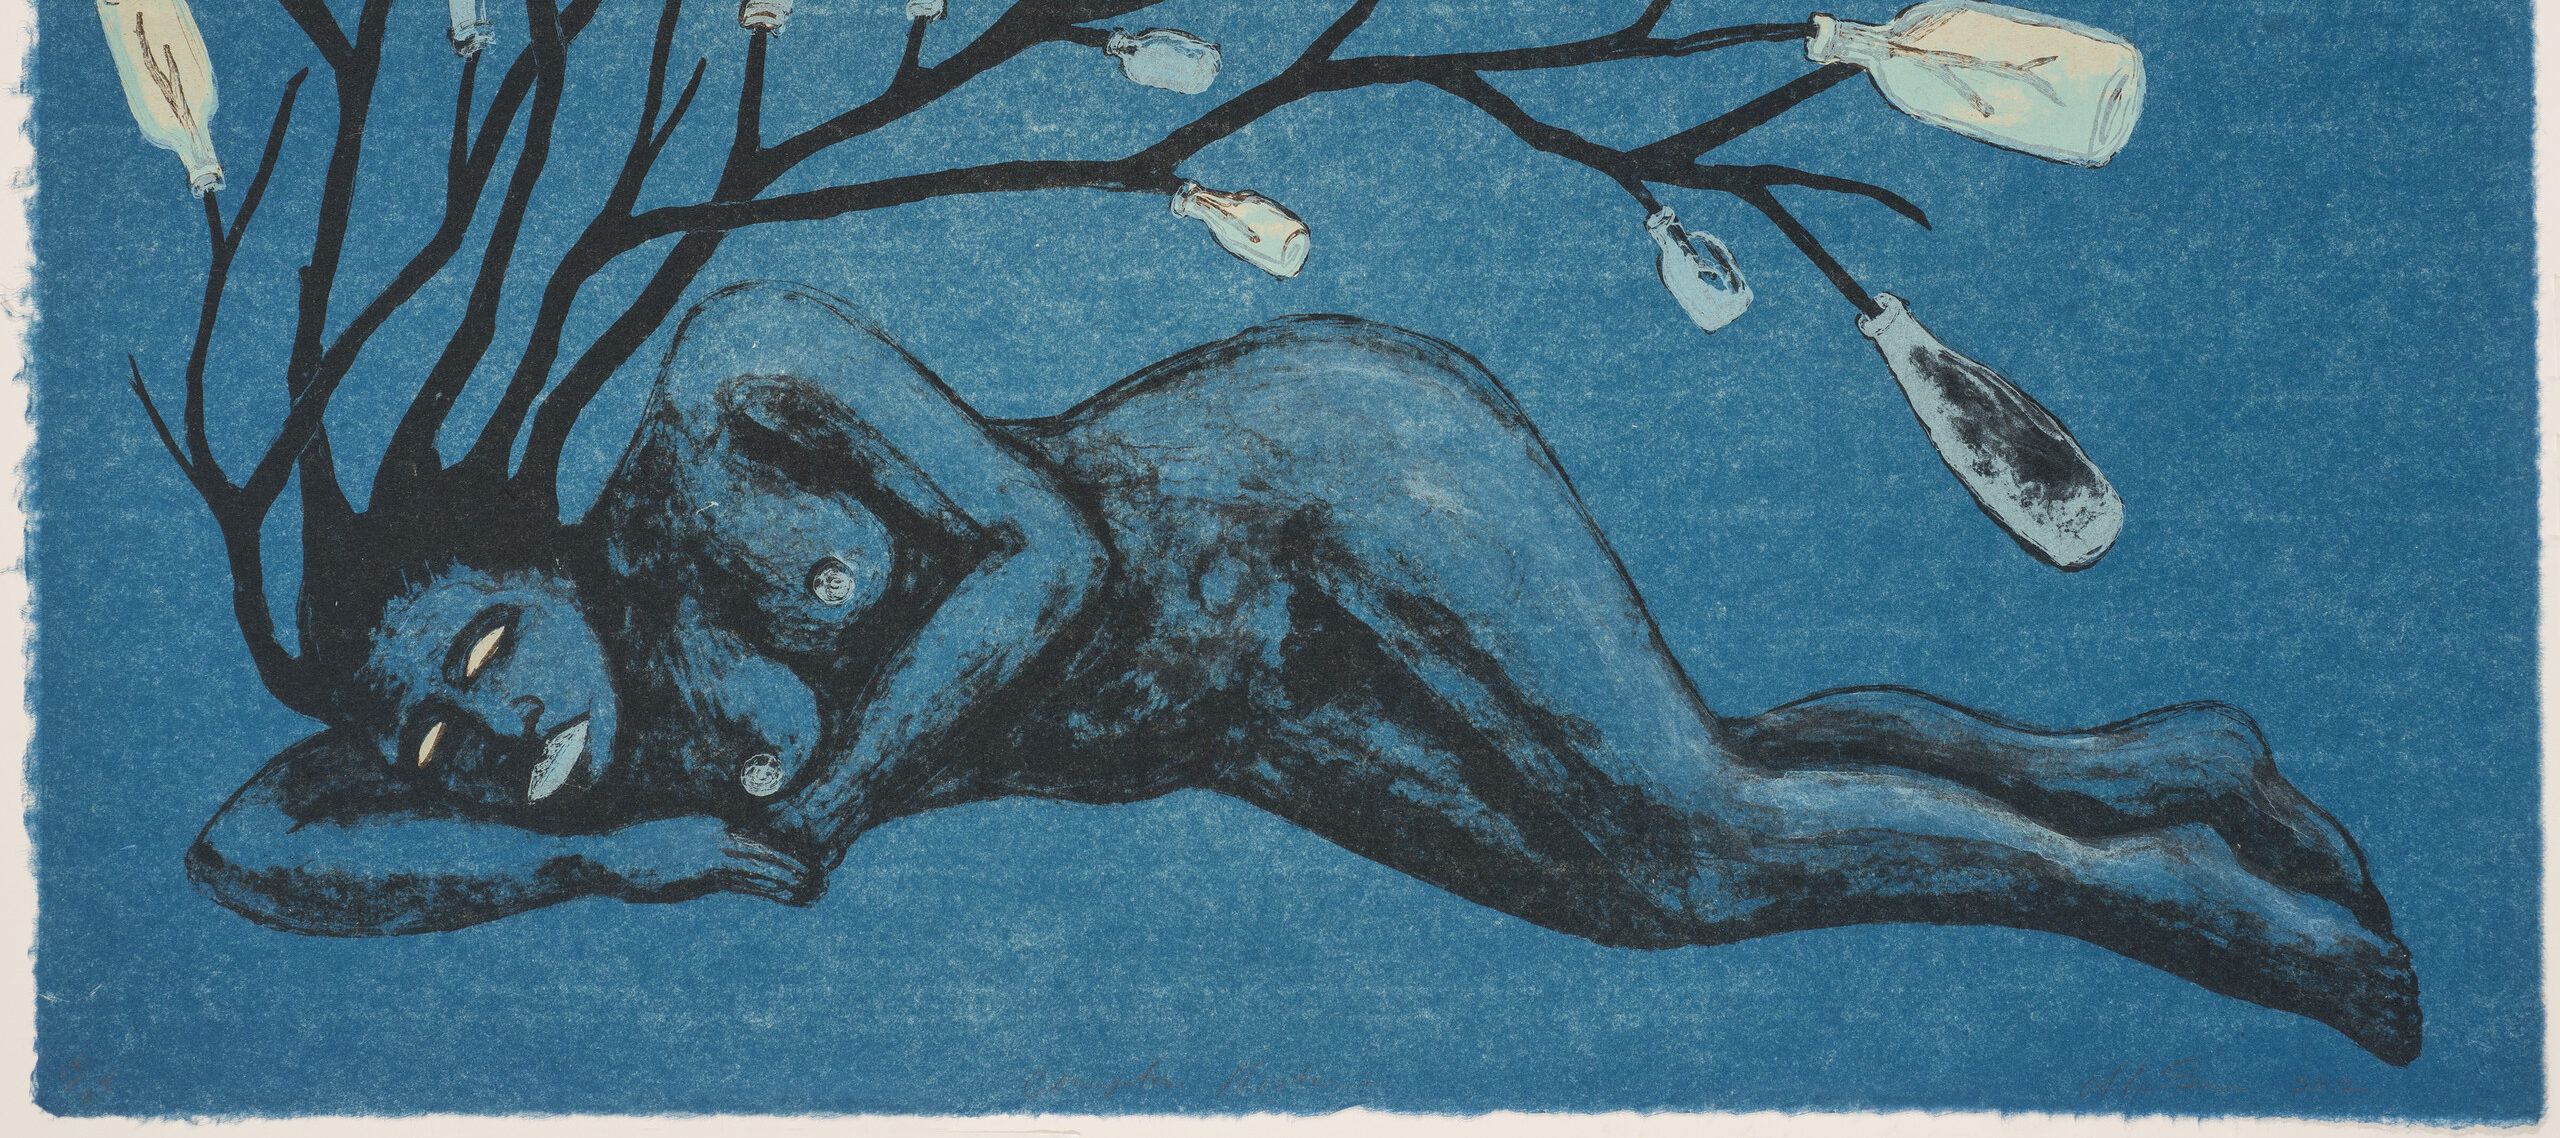 Lithograph print on a blue background portrays a nude woman laying horizontally across the length of the paper. In place of hair, a bottle tree appears to sprout from the figure’s head.